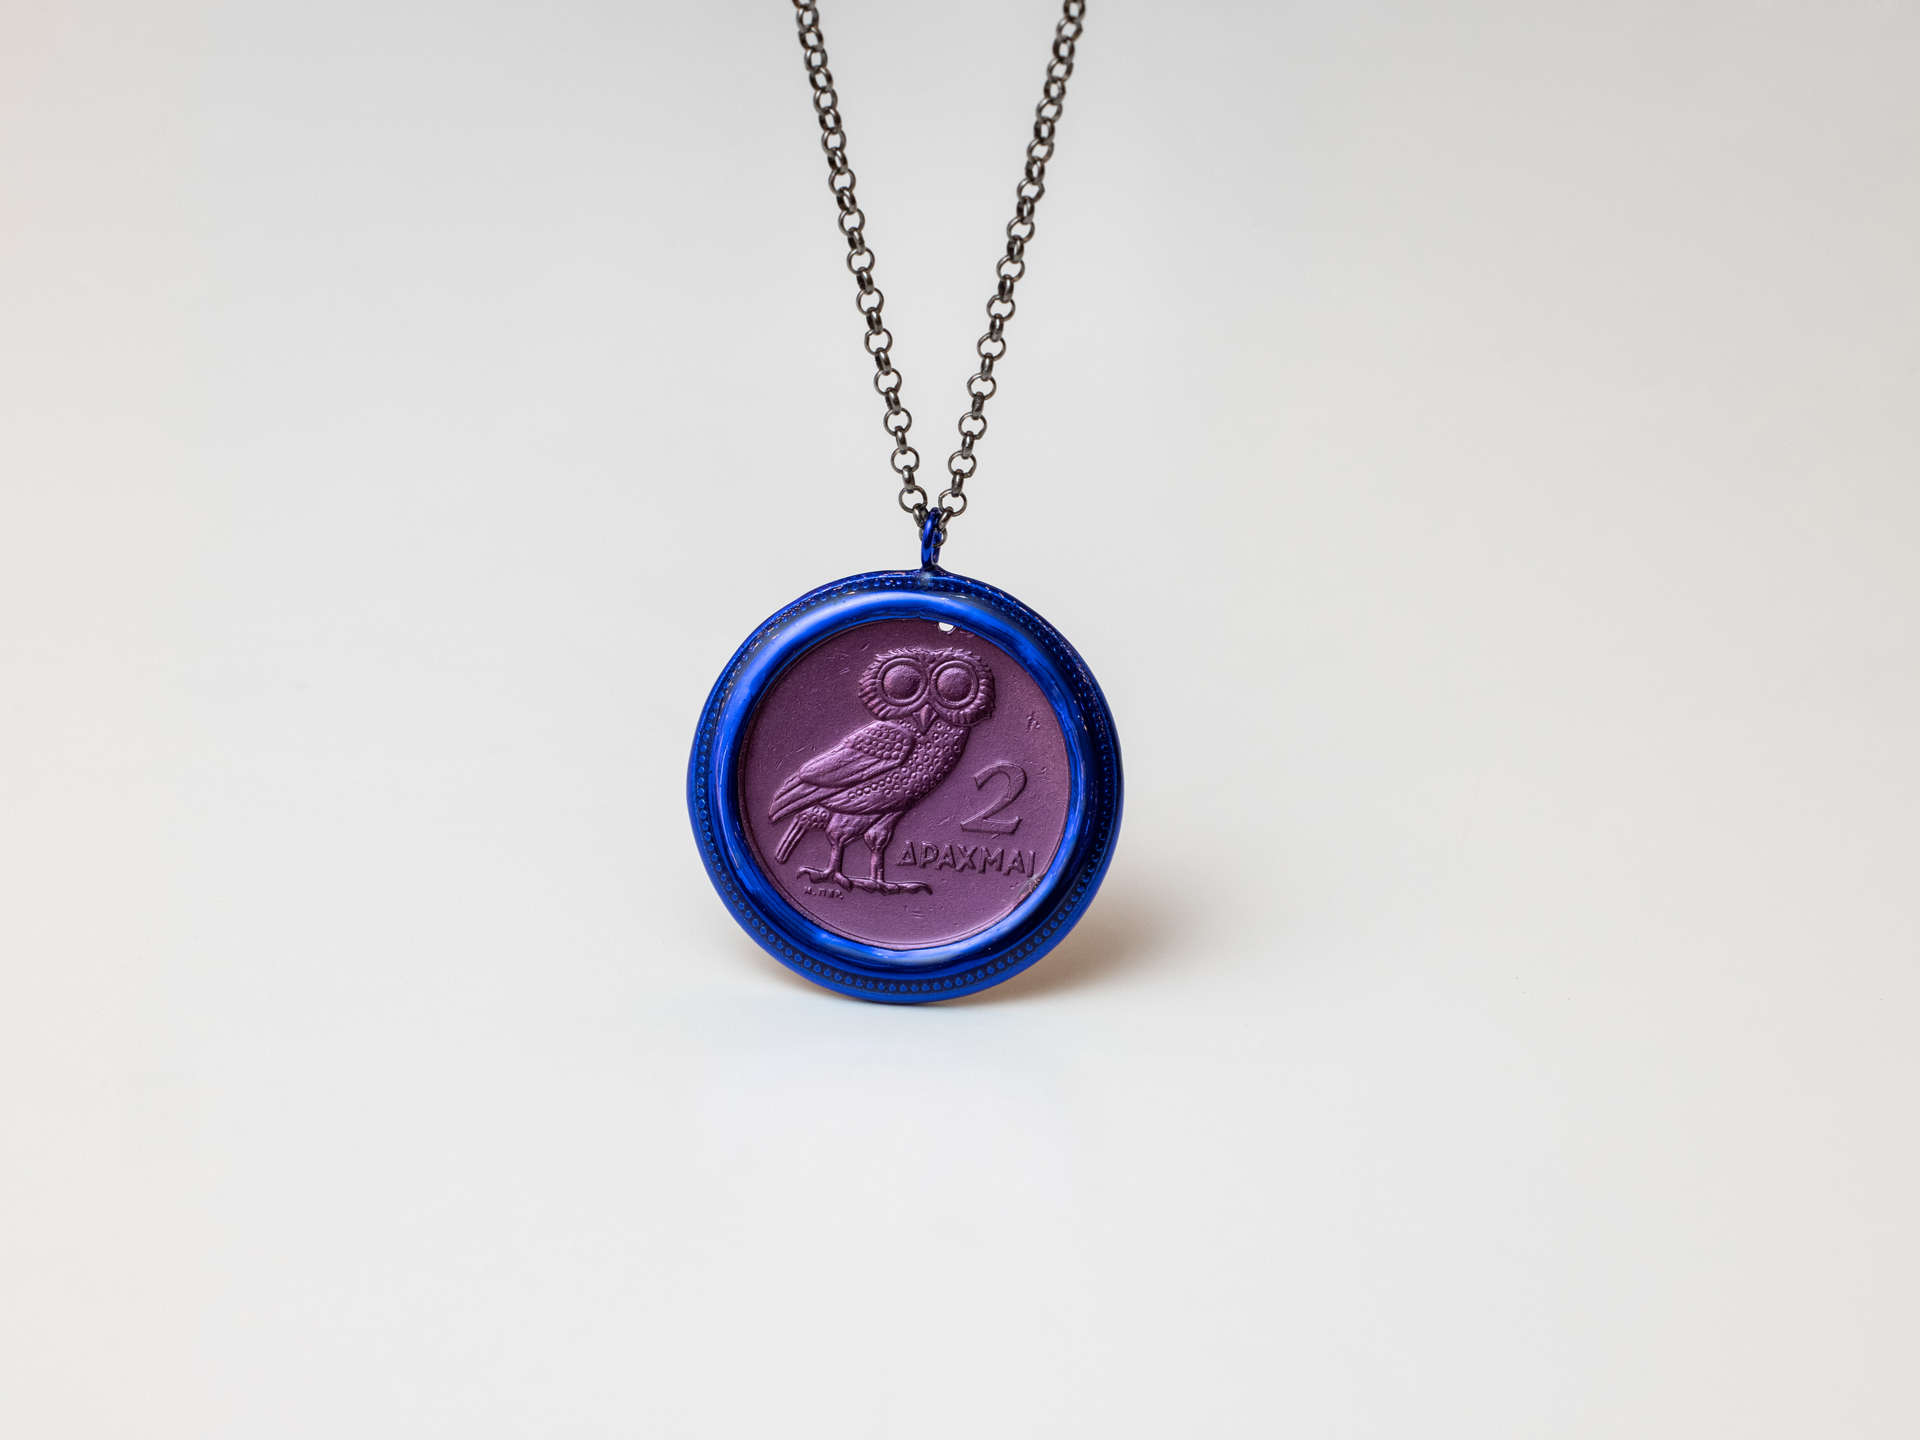 Pendant – Large Coin